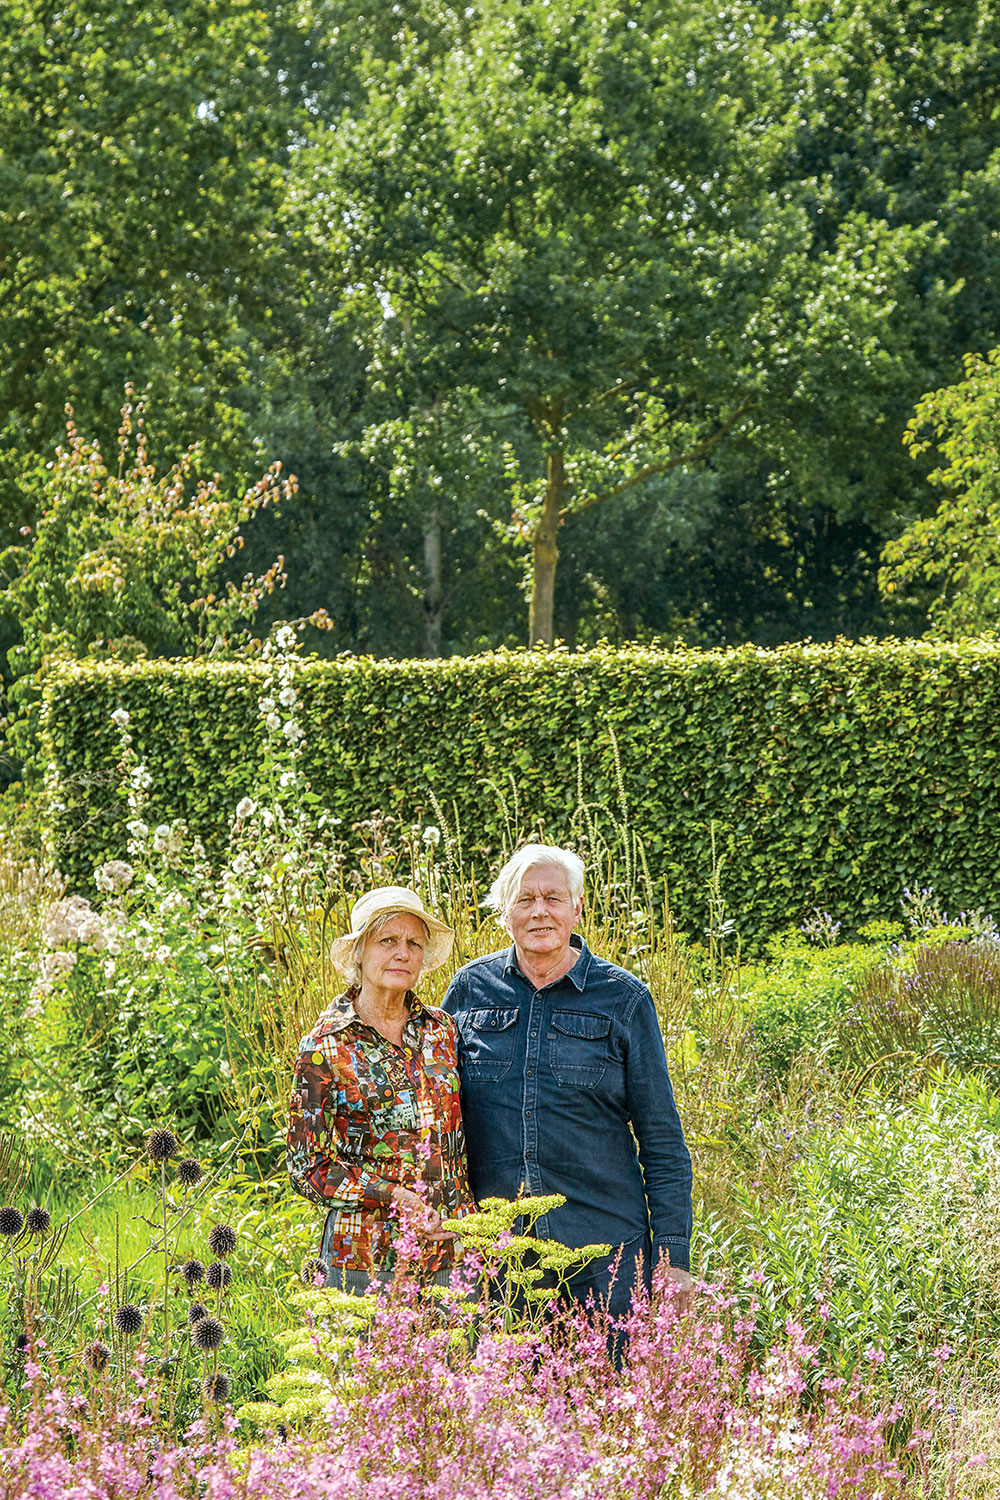 Portrait of the Dutch landscape designer (left), with silver hair and wearing a long sleeve denim buttonup, alongside his wife, wearing a colorful top and tan brimmed hat, in their private garden surrounded by grasses and perennial flowers